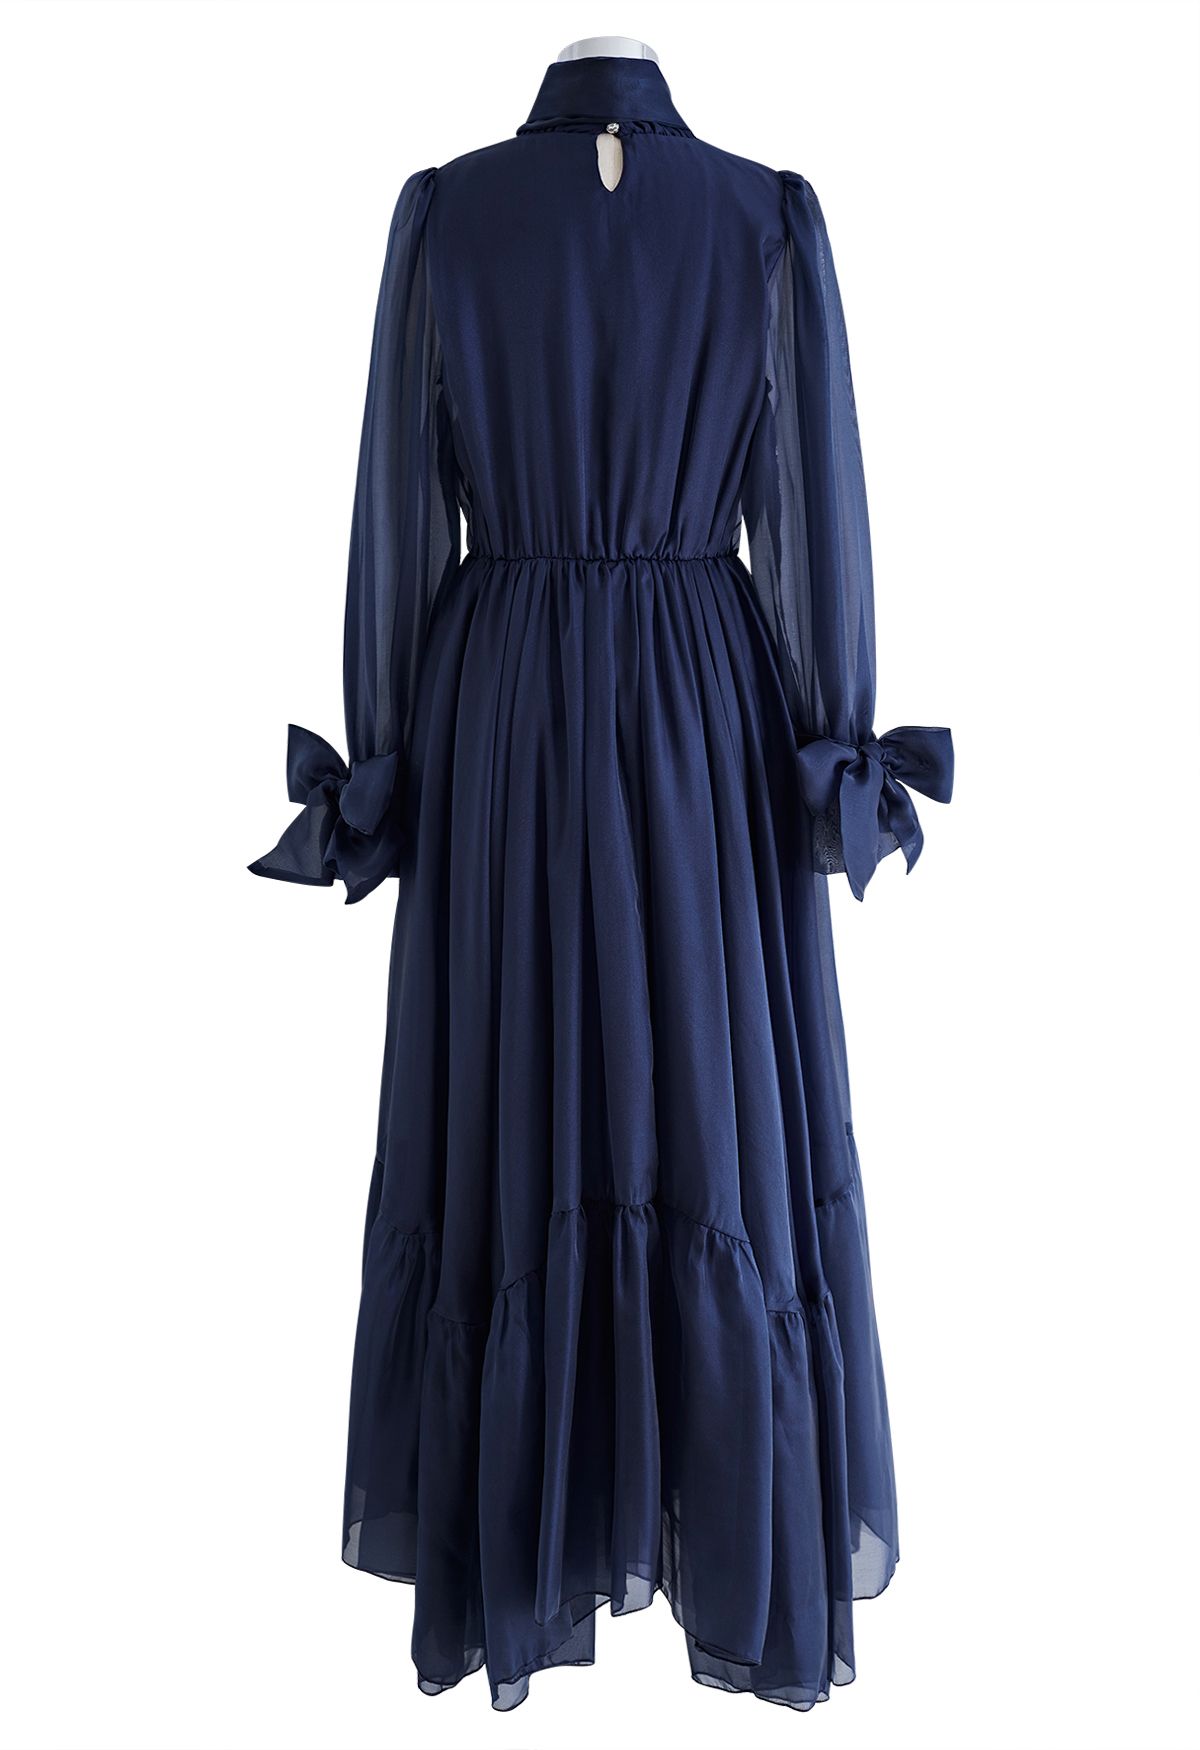 Gorgeous Bow Neck Sheer Mesh Frilling Dress in Navy